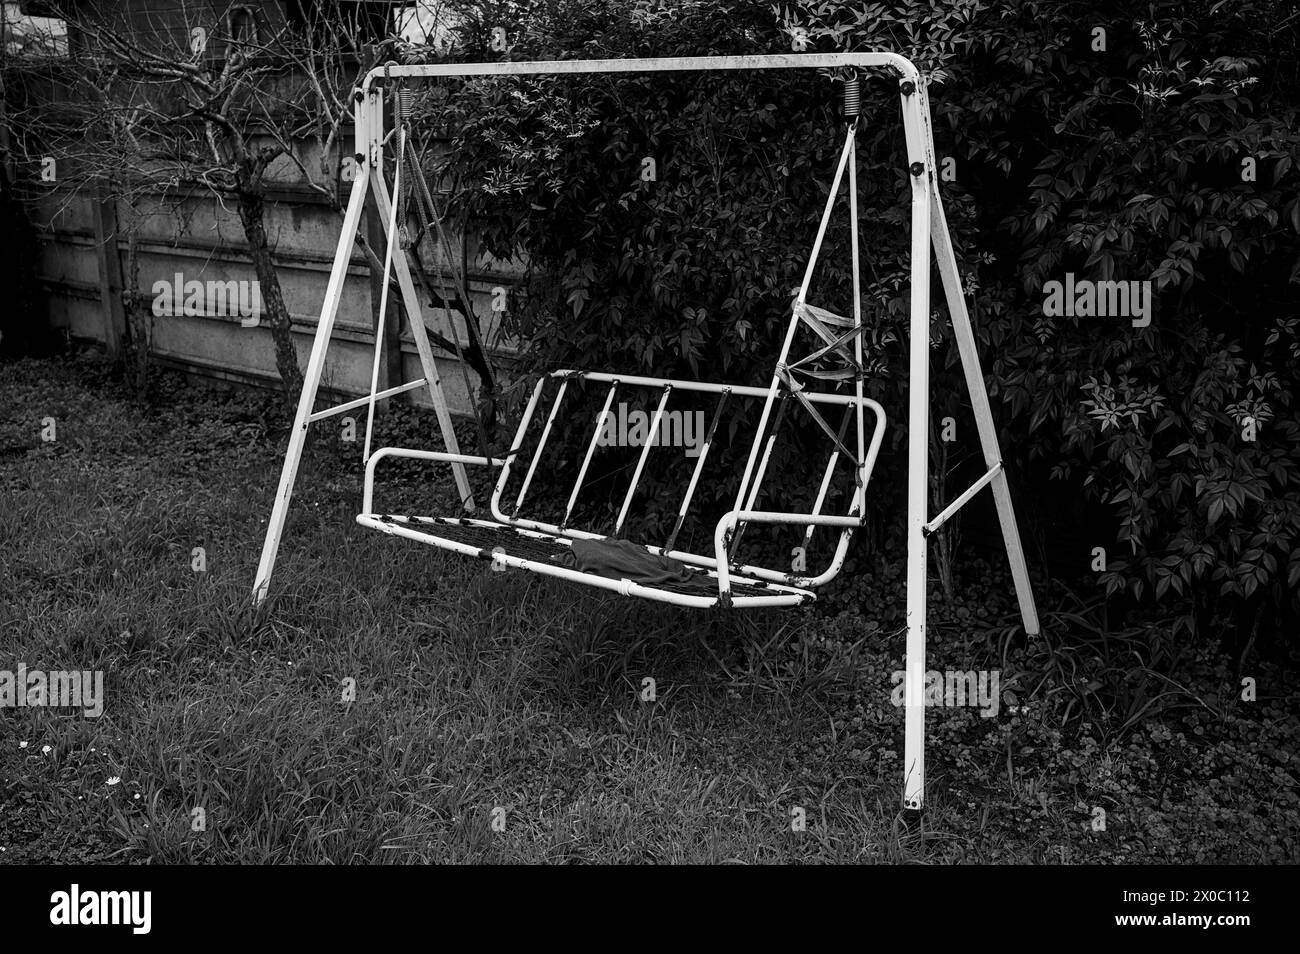 garden rocking chair in black and white Stock Photo